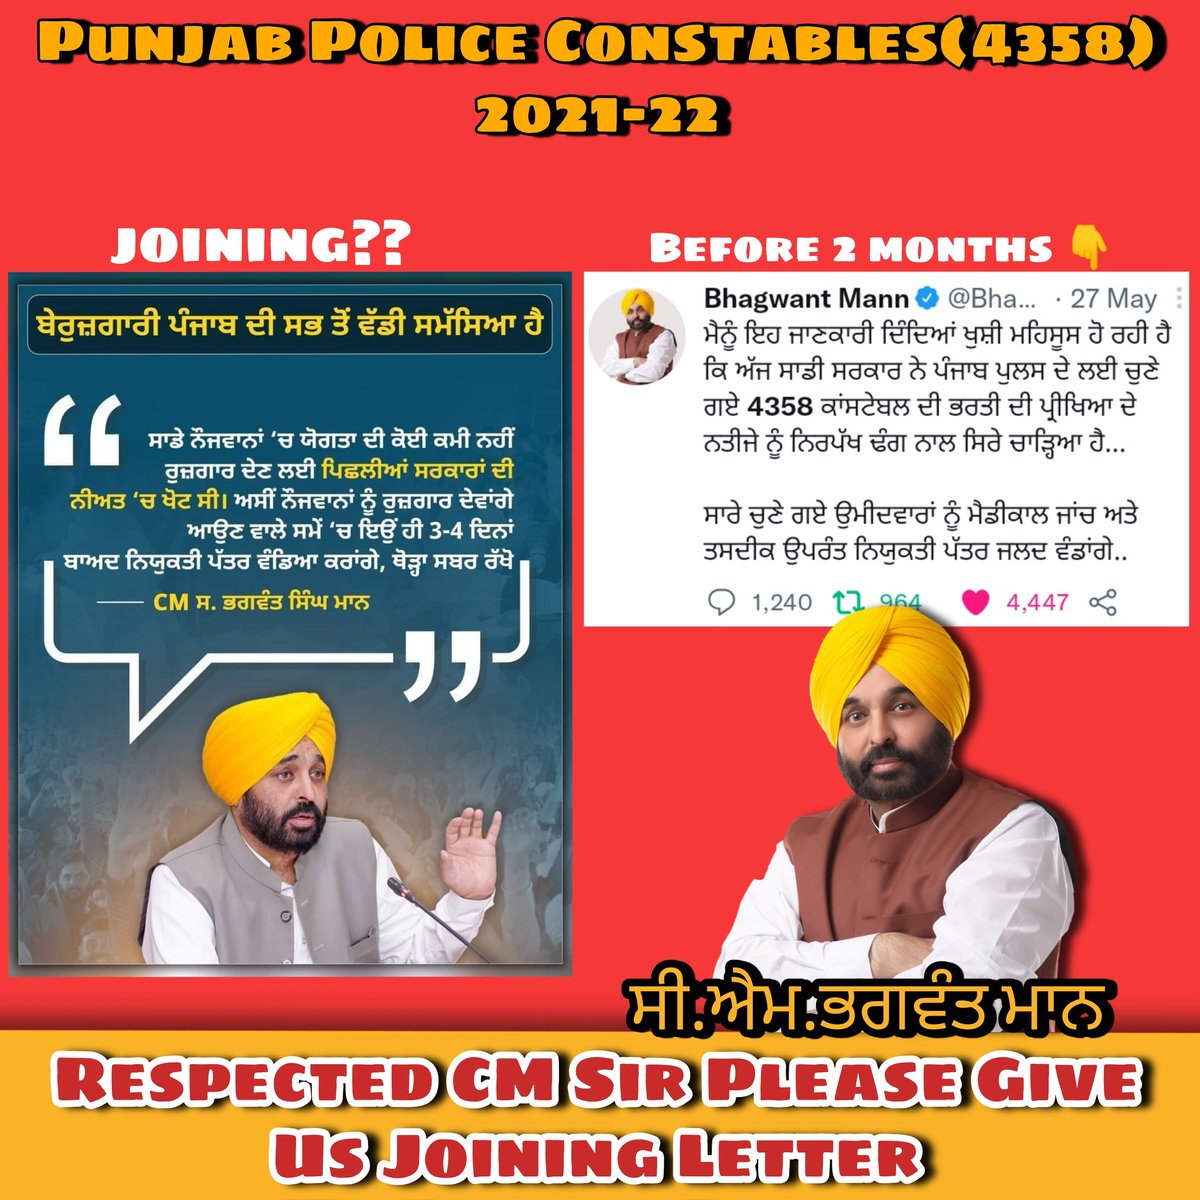 @pavittarvirk @BhagwantMann @ArvindKejriwal @HarpalCheemaMLA @raghav_chadha @AroraAmanSunam @AAPPunjab @News18Punjab Respected CM @BhagwantMann Sir as you tweeted 2 months ago about giving joining letter to newly selected constables in Punjab Police. We have been waiting for a long time for the moment when you will give us the joining letter #punjab_police_constable_joining @PunjabGovtIndia